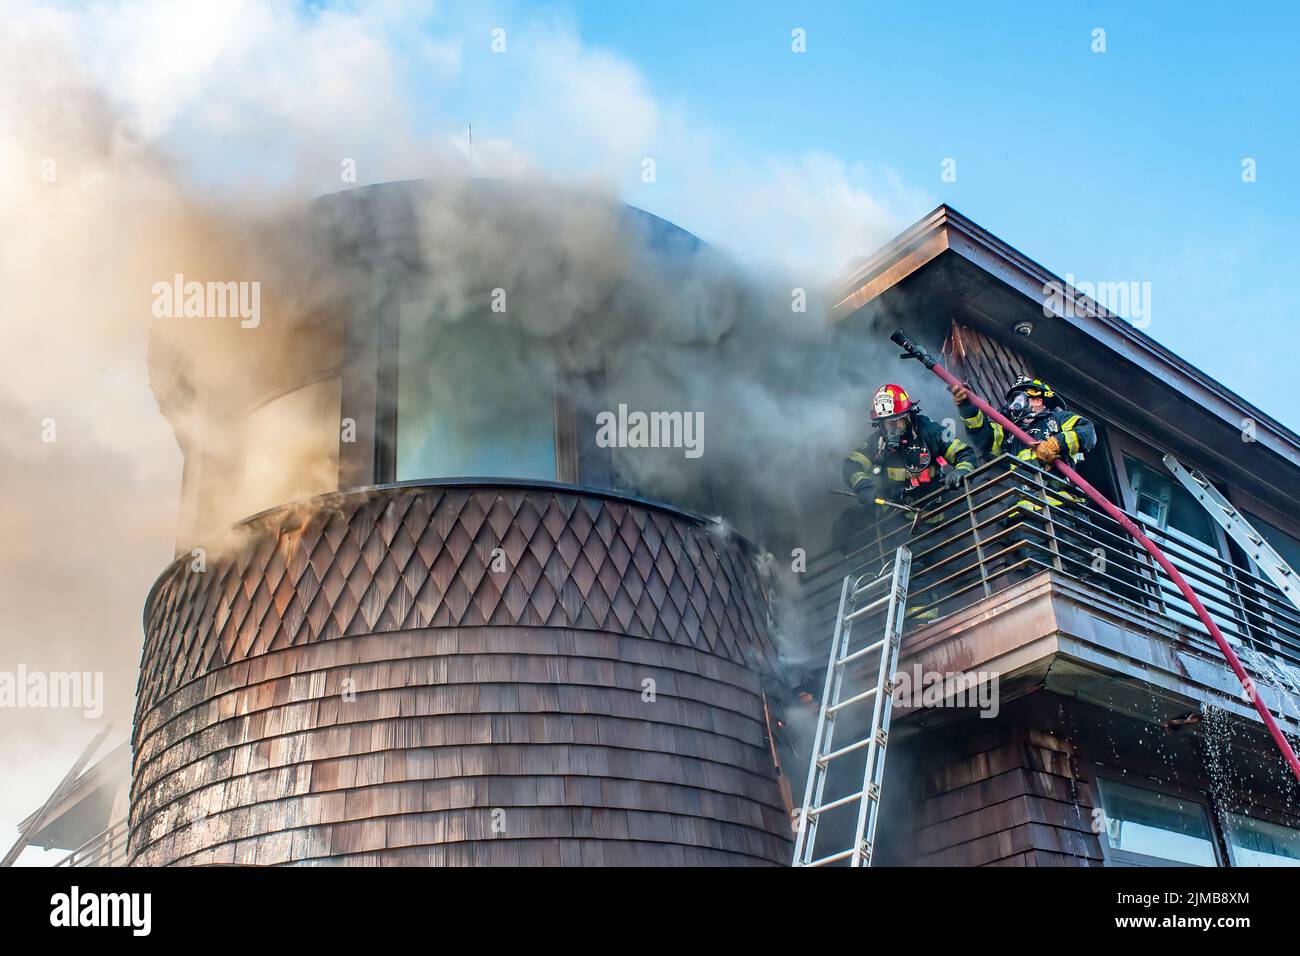 Bridgehampton, New York firefighters were aided by firefighters from several other departments as they fought a stubborn fire in a modern house at 187 Stock Photo